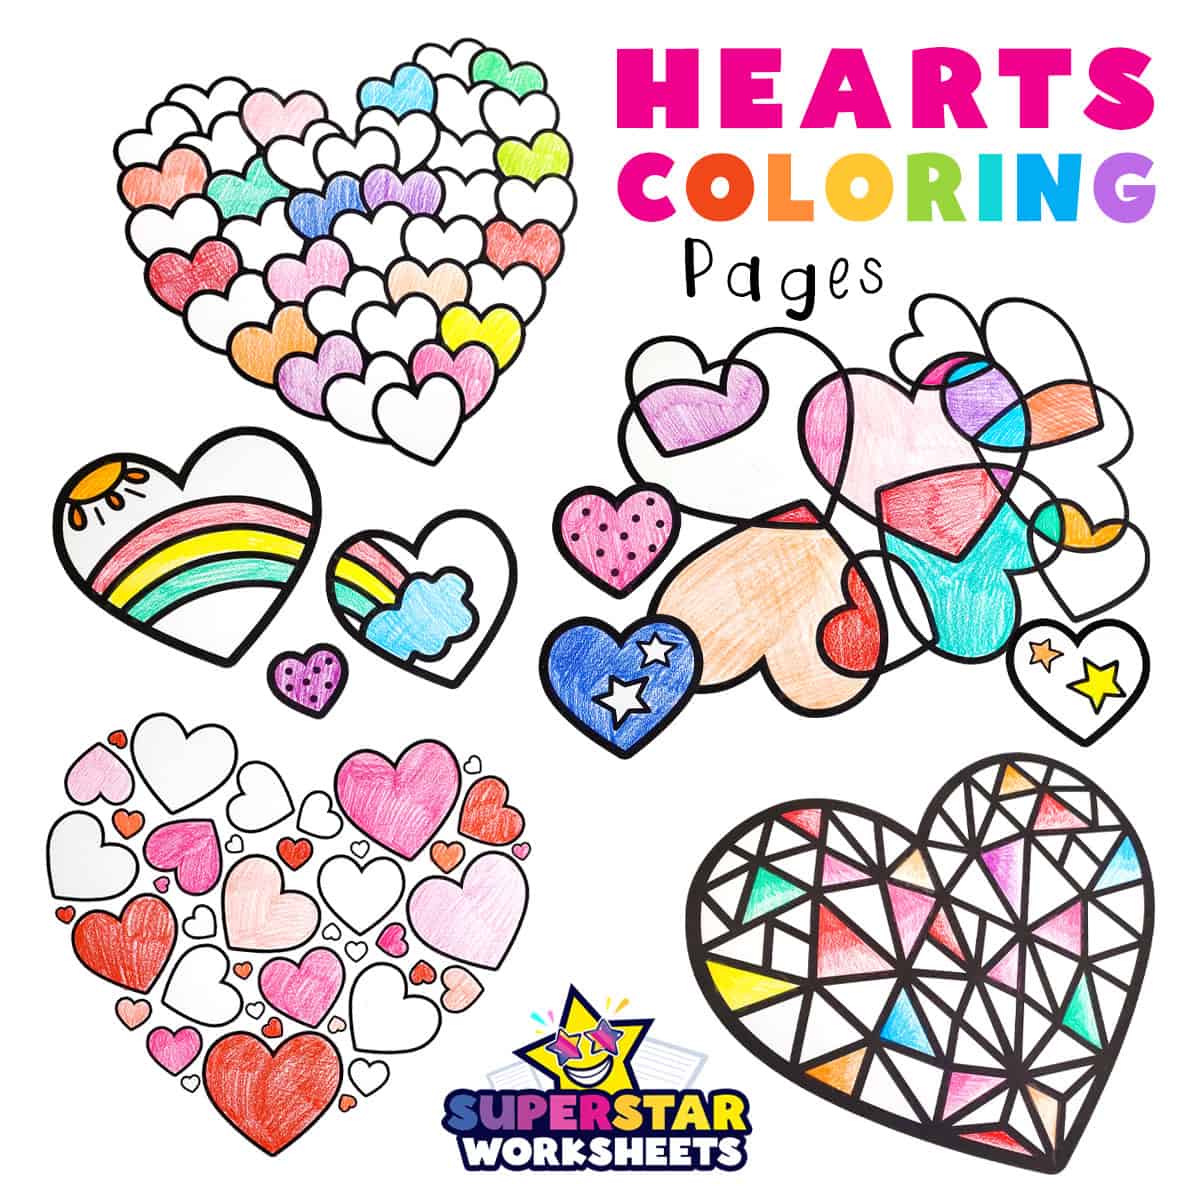 Heart Coloring Pages - Superstar Worksheets